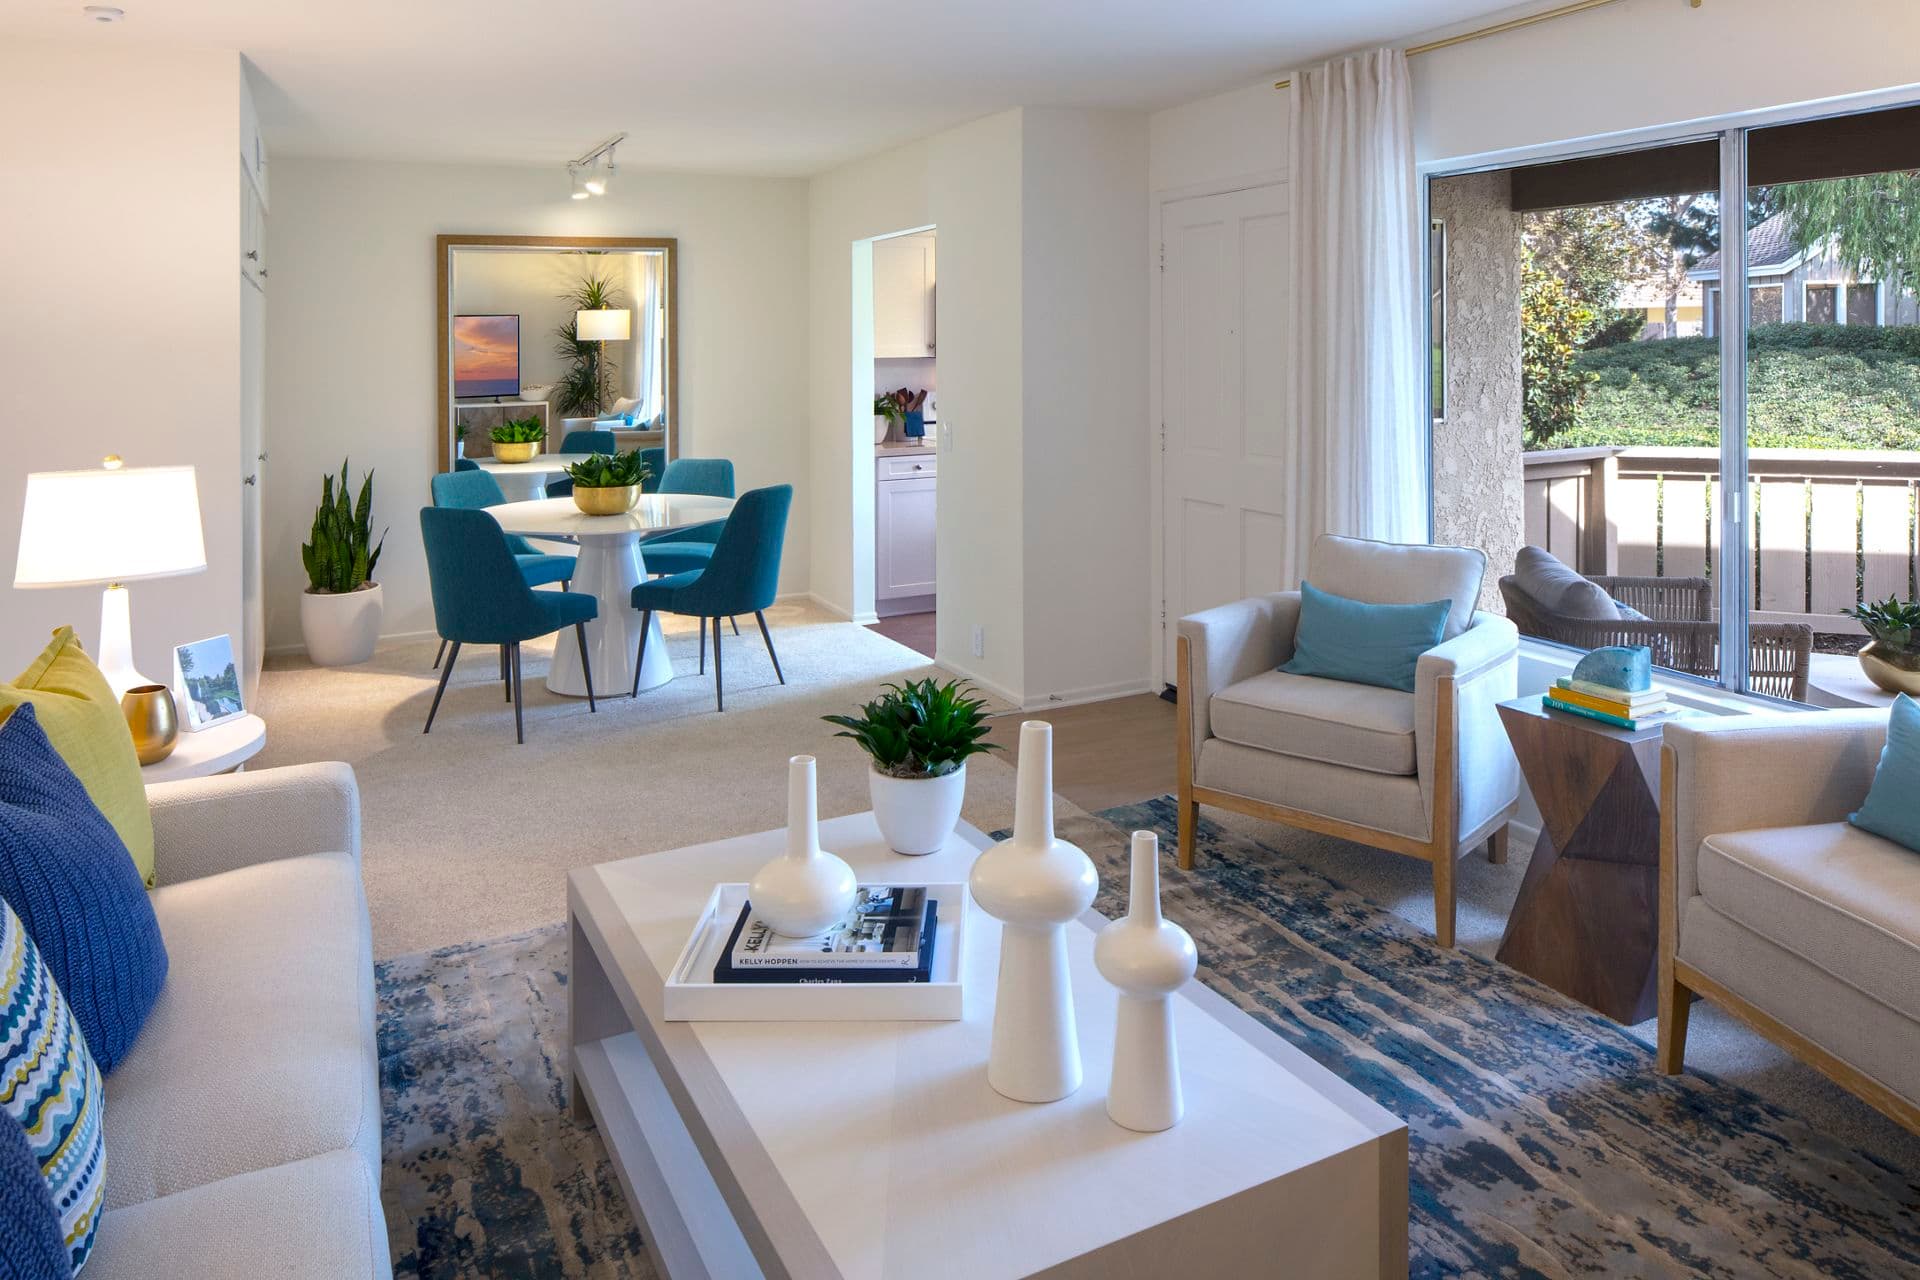 Interior view of living room and dining room atDeerfield Apartment Homes in Irvine, CA.